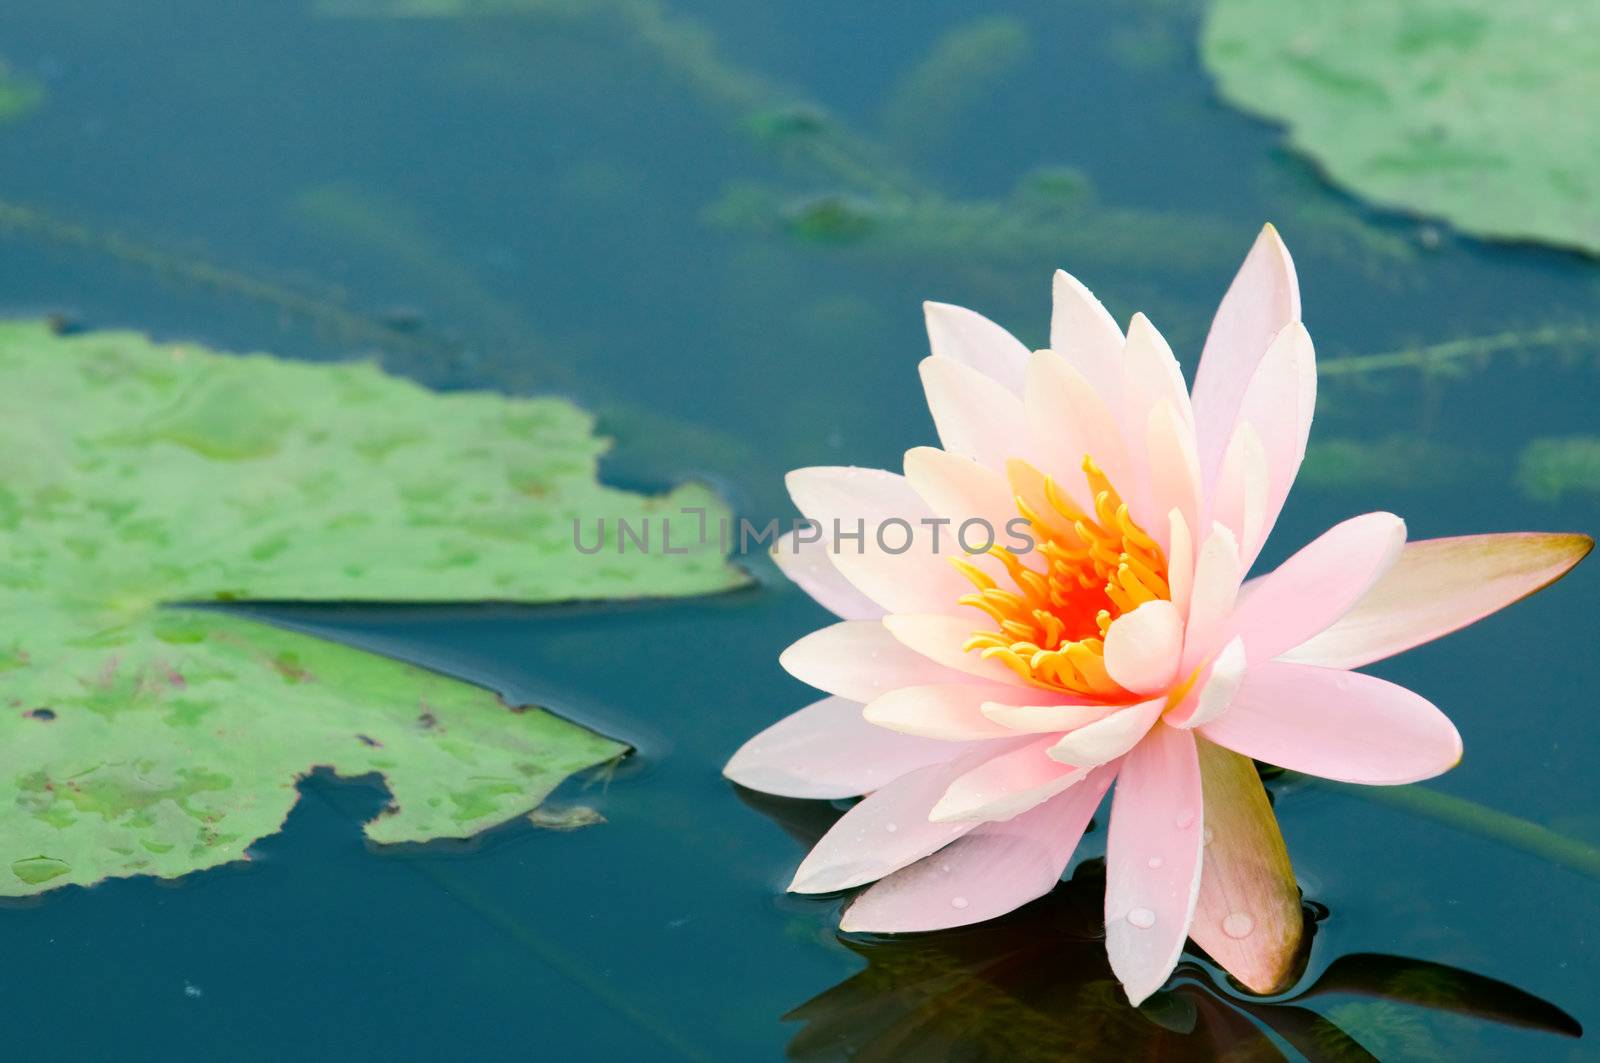 The close up (detail) of pink water lily with reflection over water